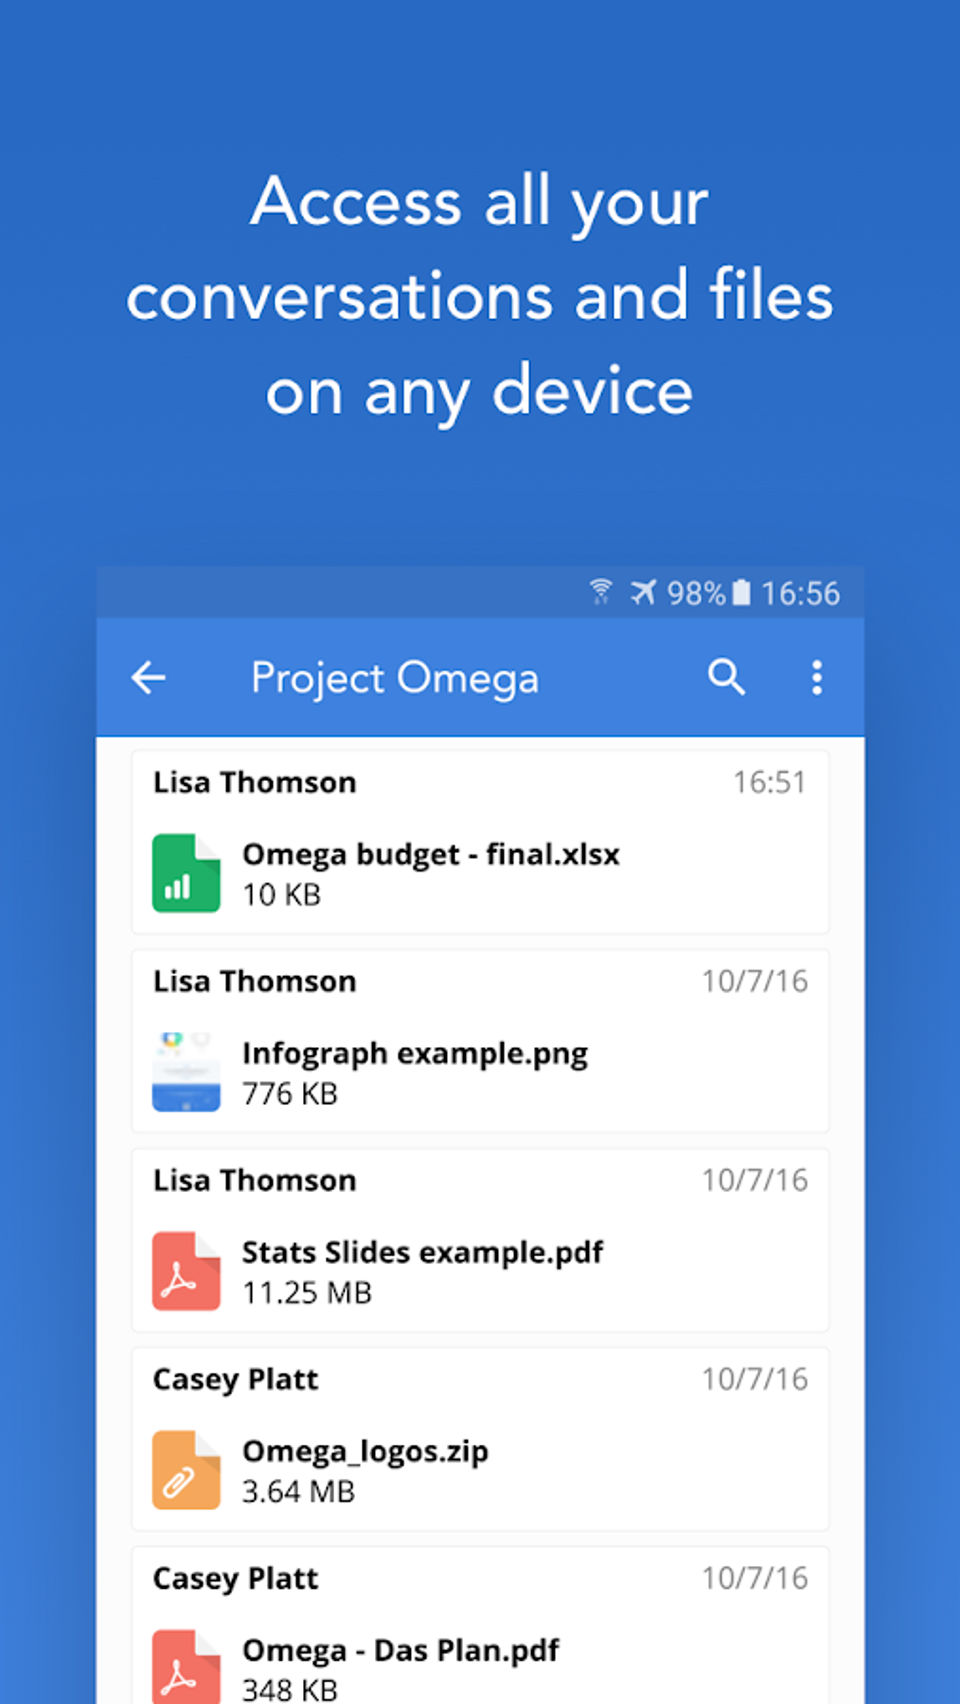 Fleep screenshot: Giving anytime and anywhere use for participants, the Fleep app for Android and iOS enables conversations and files to be accessed on mobile devices